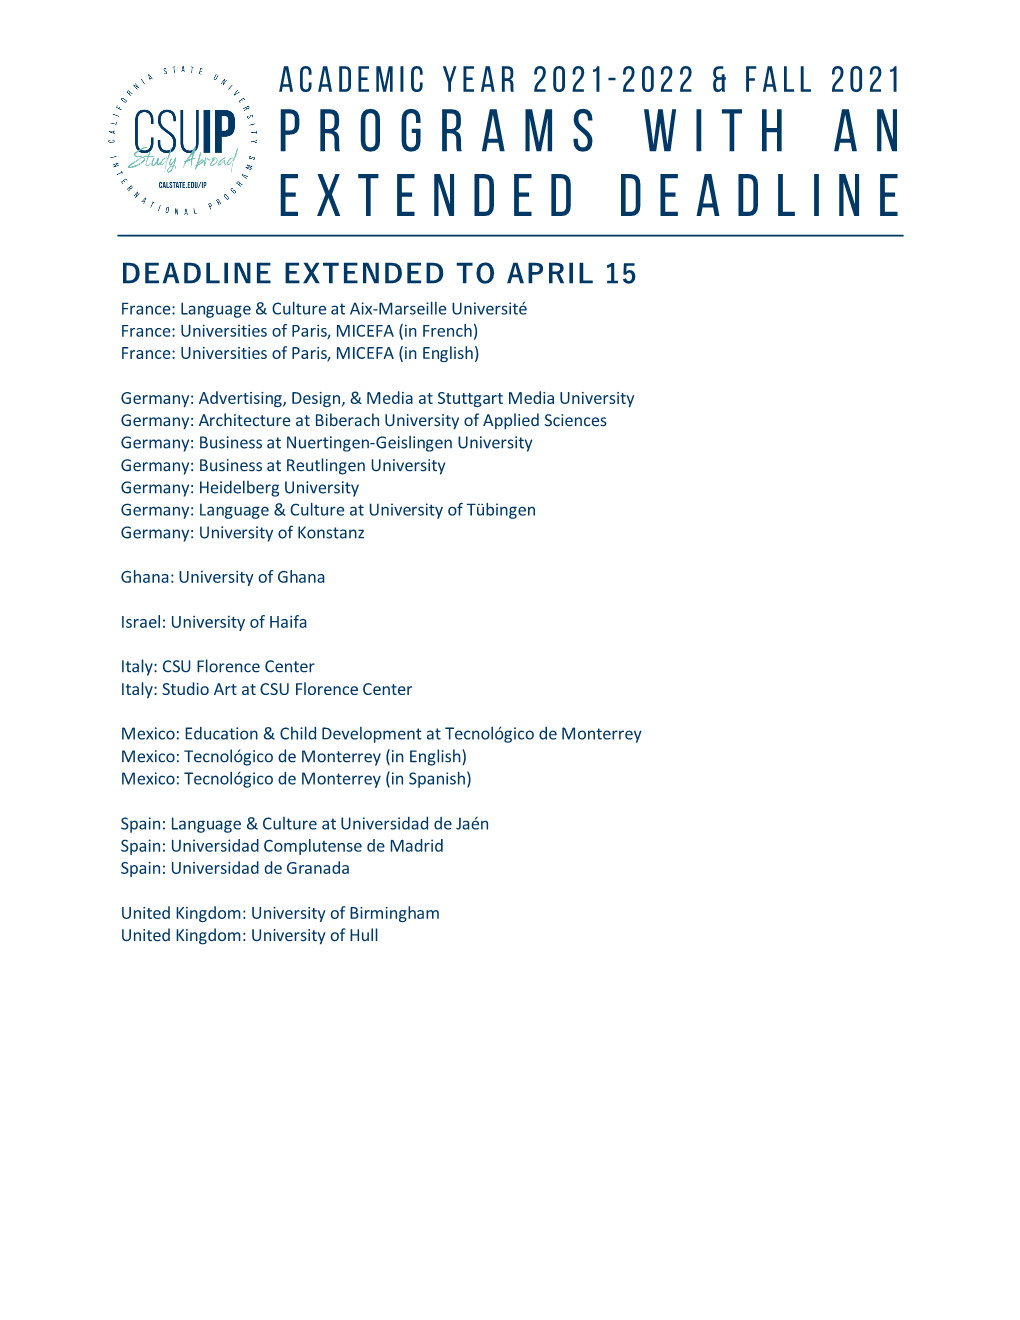 Programs with an Extended Deadline